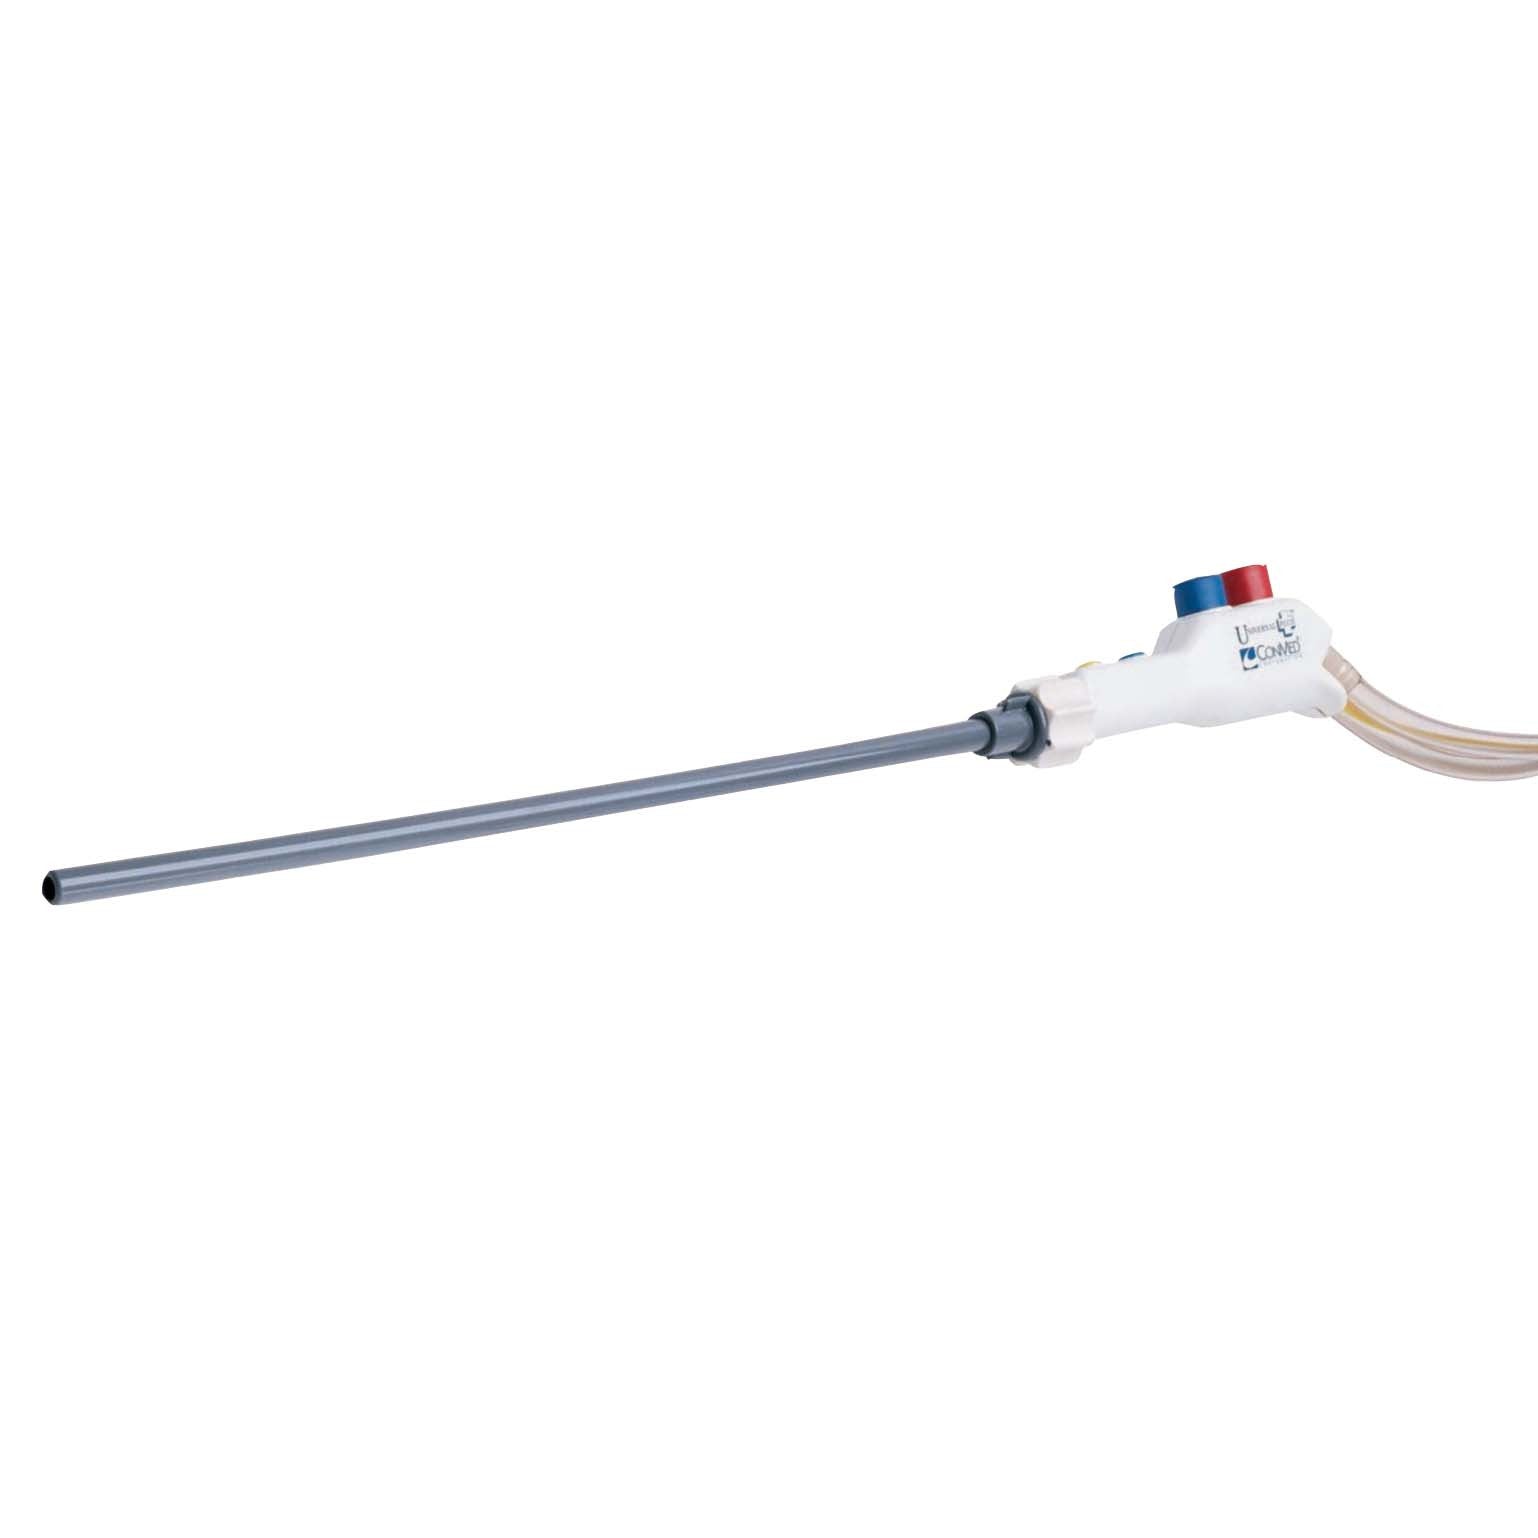 ConMed Universal Plus Straight Electrosurgical Control Handle